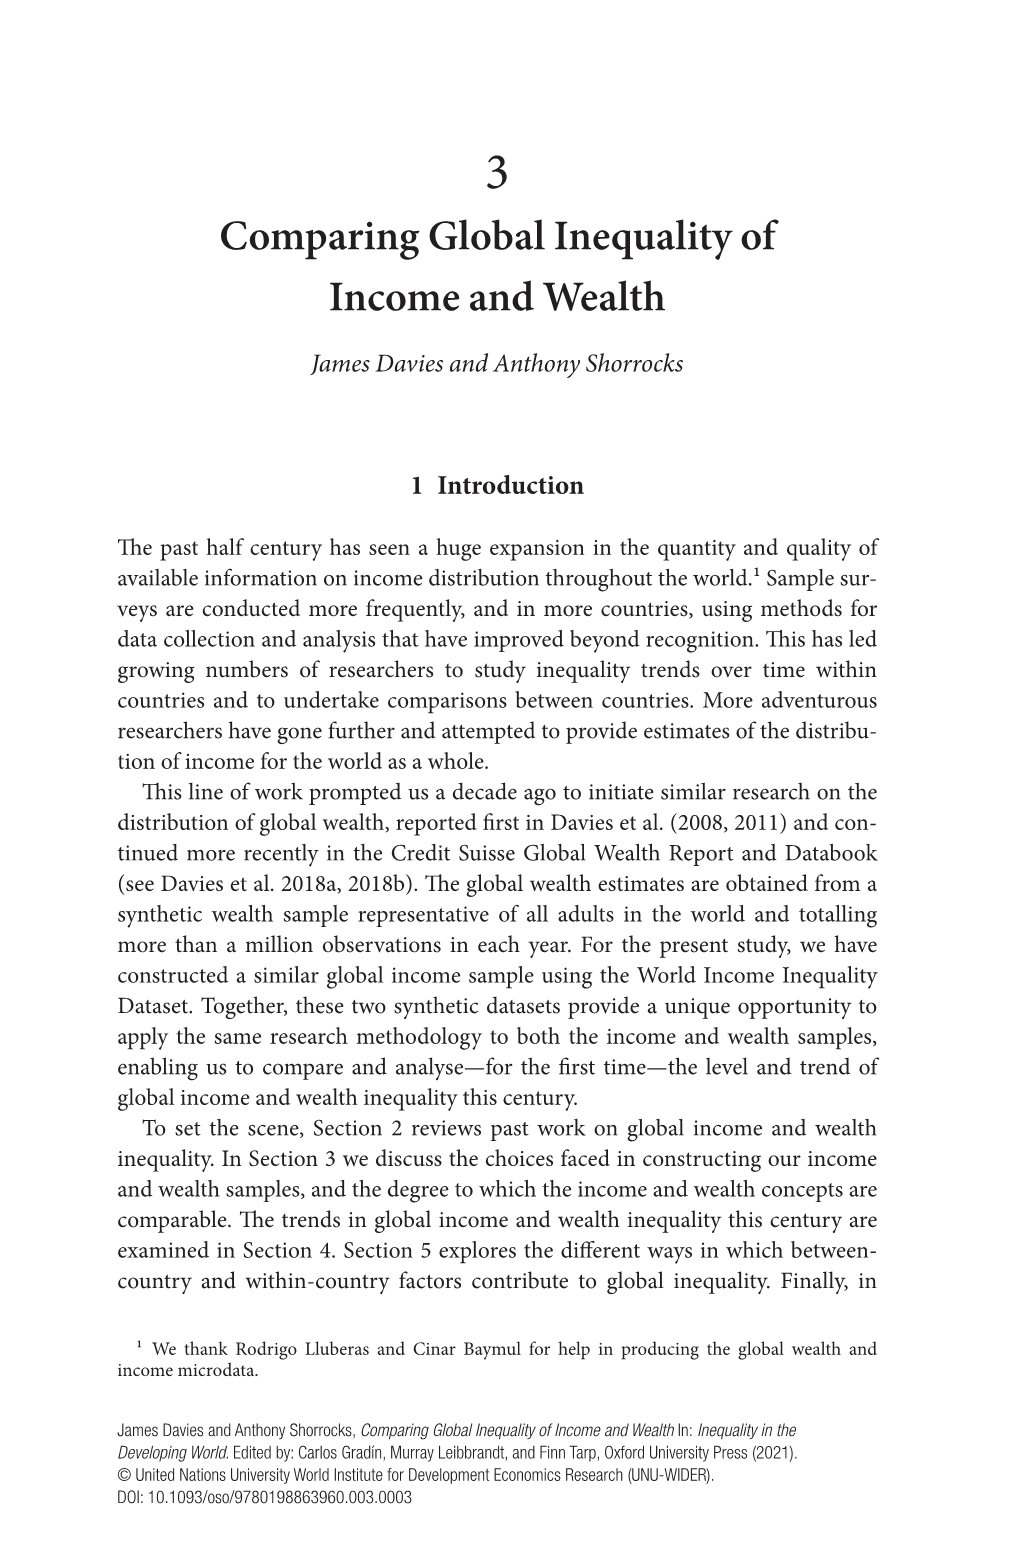 Comparing Global Inequality of Income and Wealth